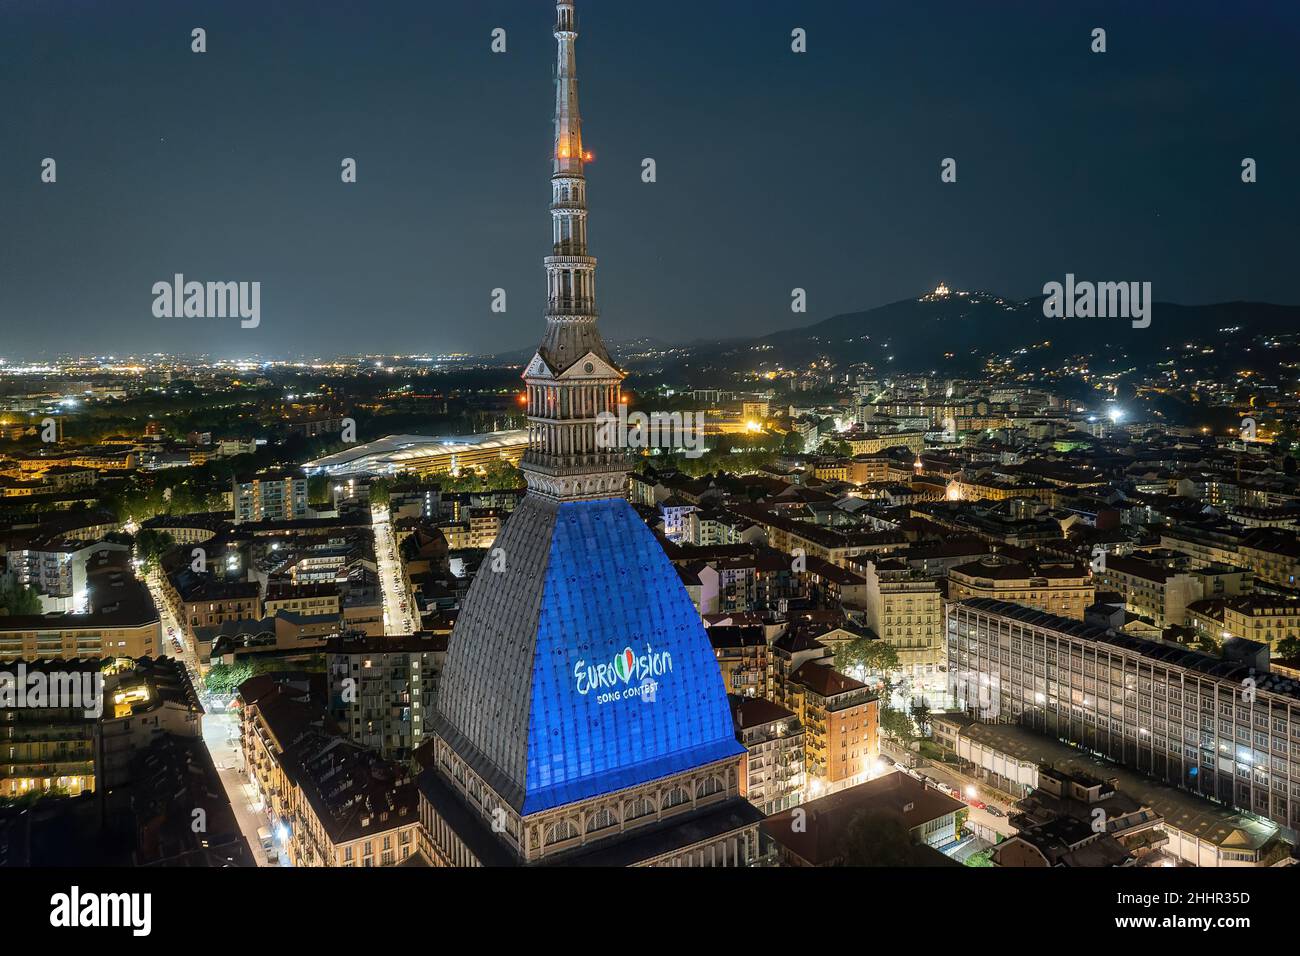 Eurovision Song Contest logo projected on the Mole Antonelliana. The 66th edition will be held in Turin in May 2022. Turin, Italy - January 2022 Stock Photo